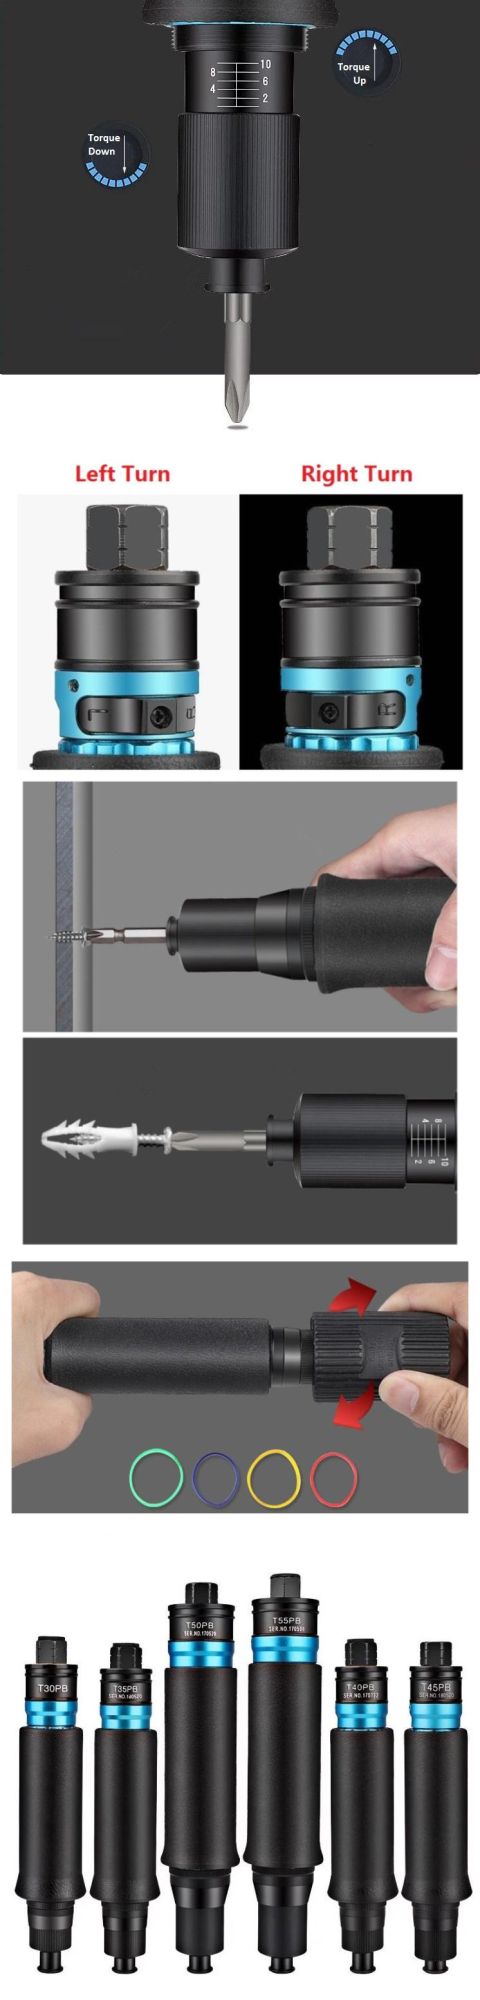 Automatic Air Screwdriver with Adjustable Torque Force (T40PB)